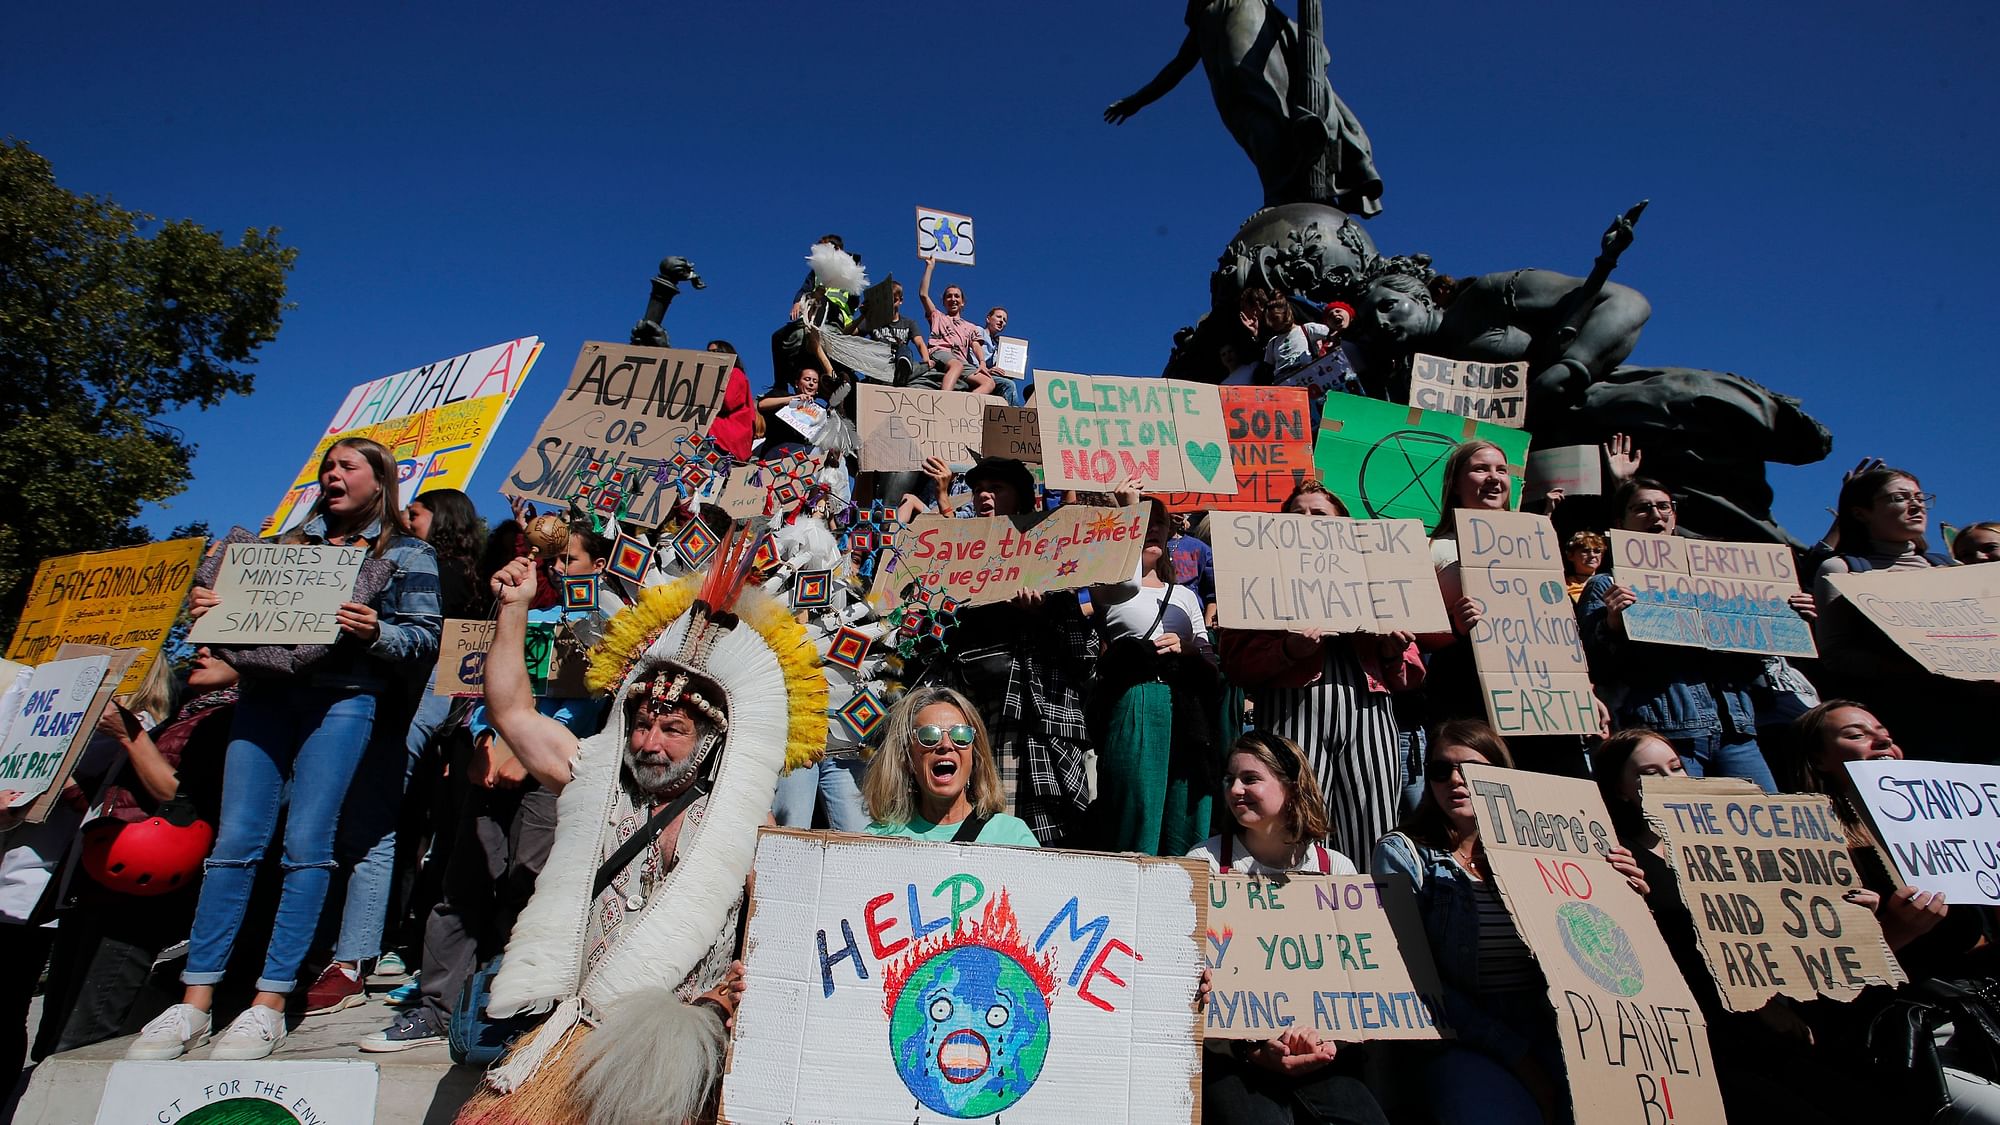 Youths gather at Nation square at the start of a climate demonstration on Friday, 20 September in Paris.